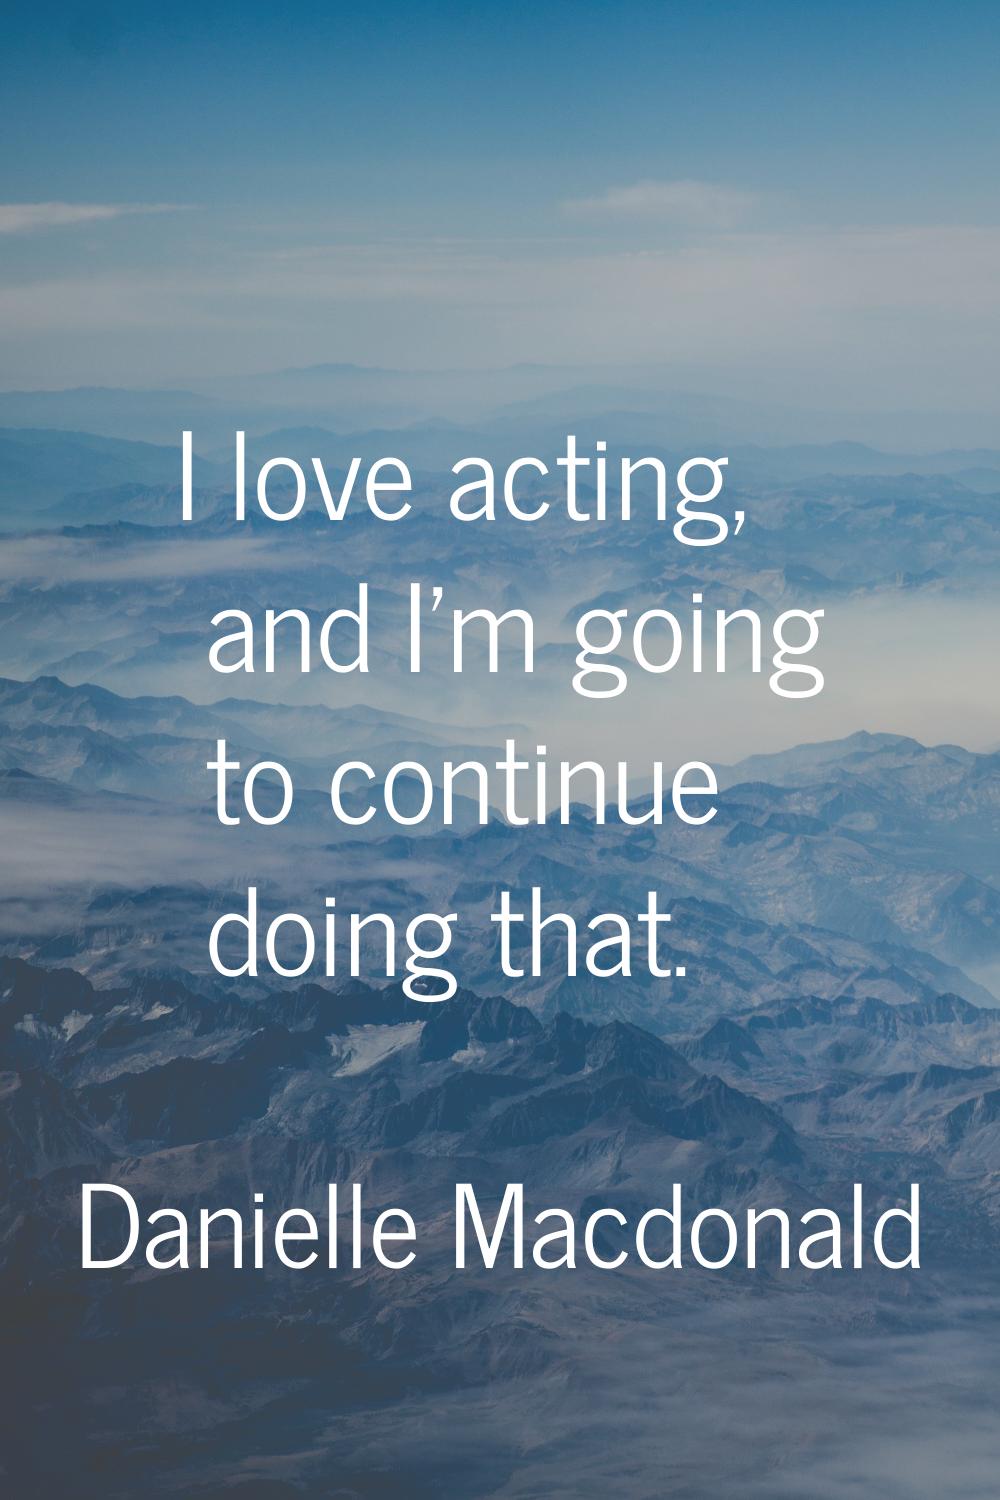 I love acting, and I'm going to continue doing that.